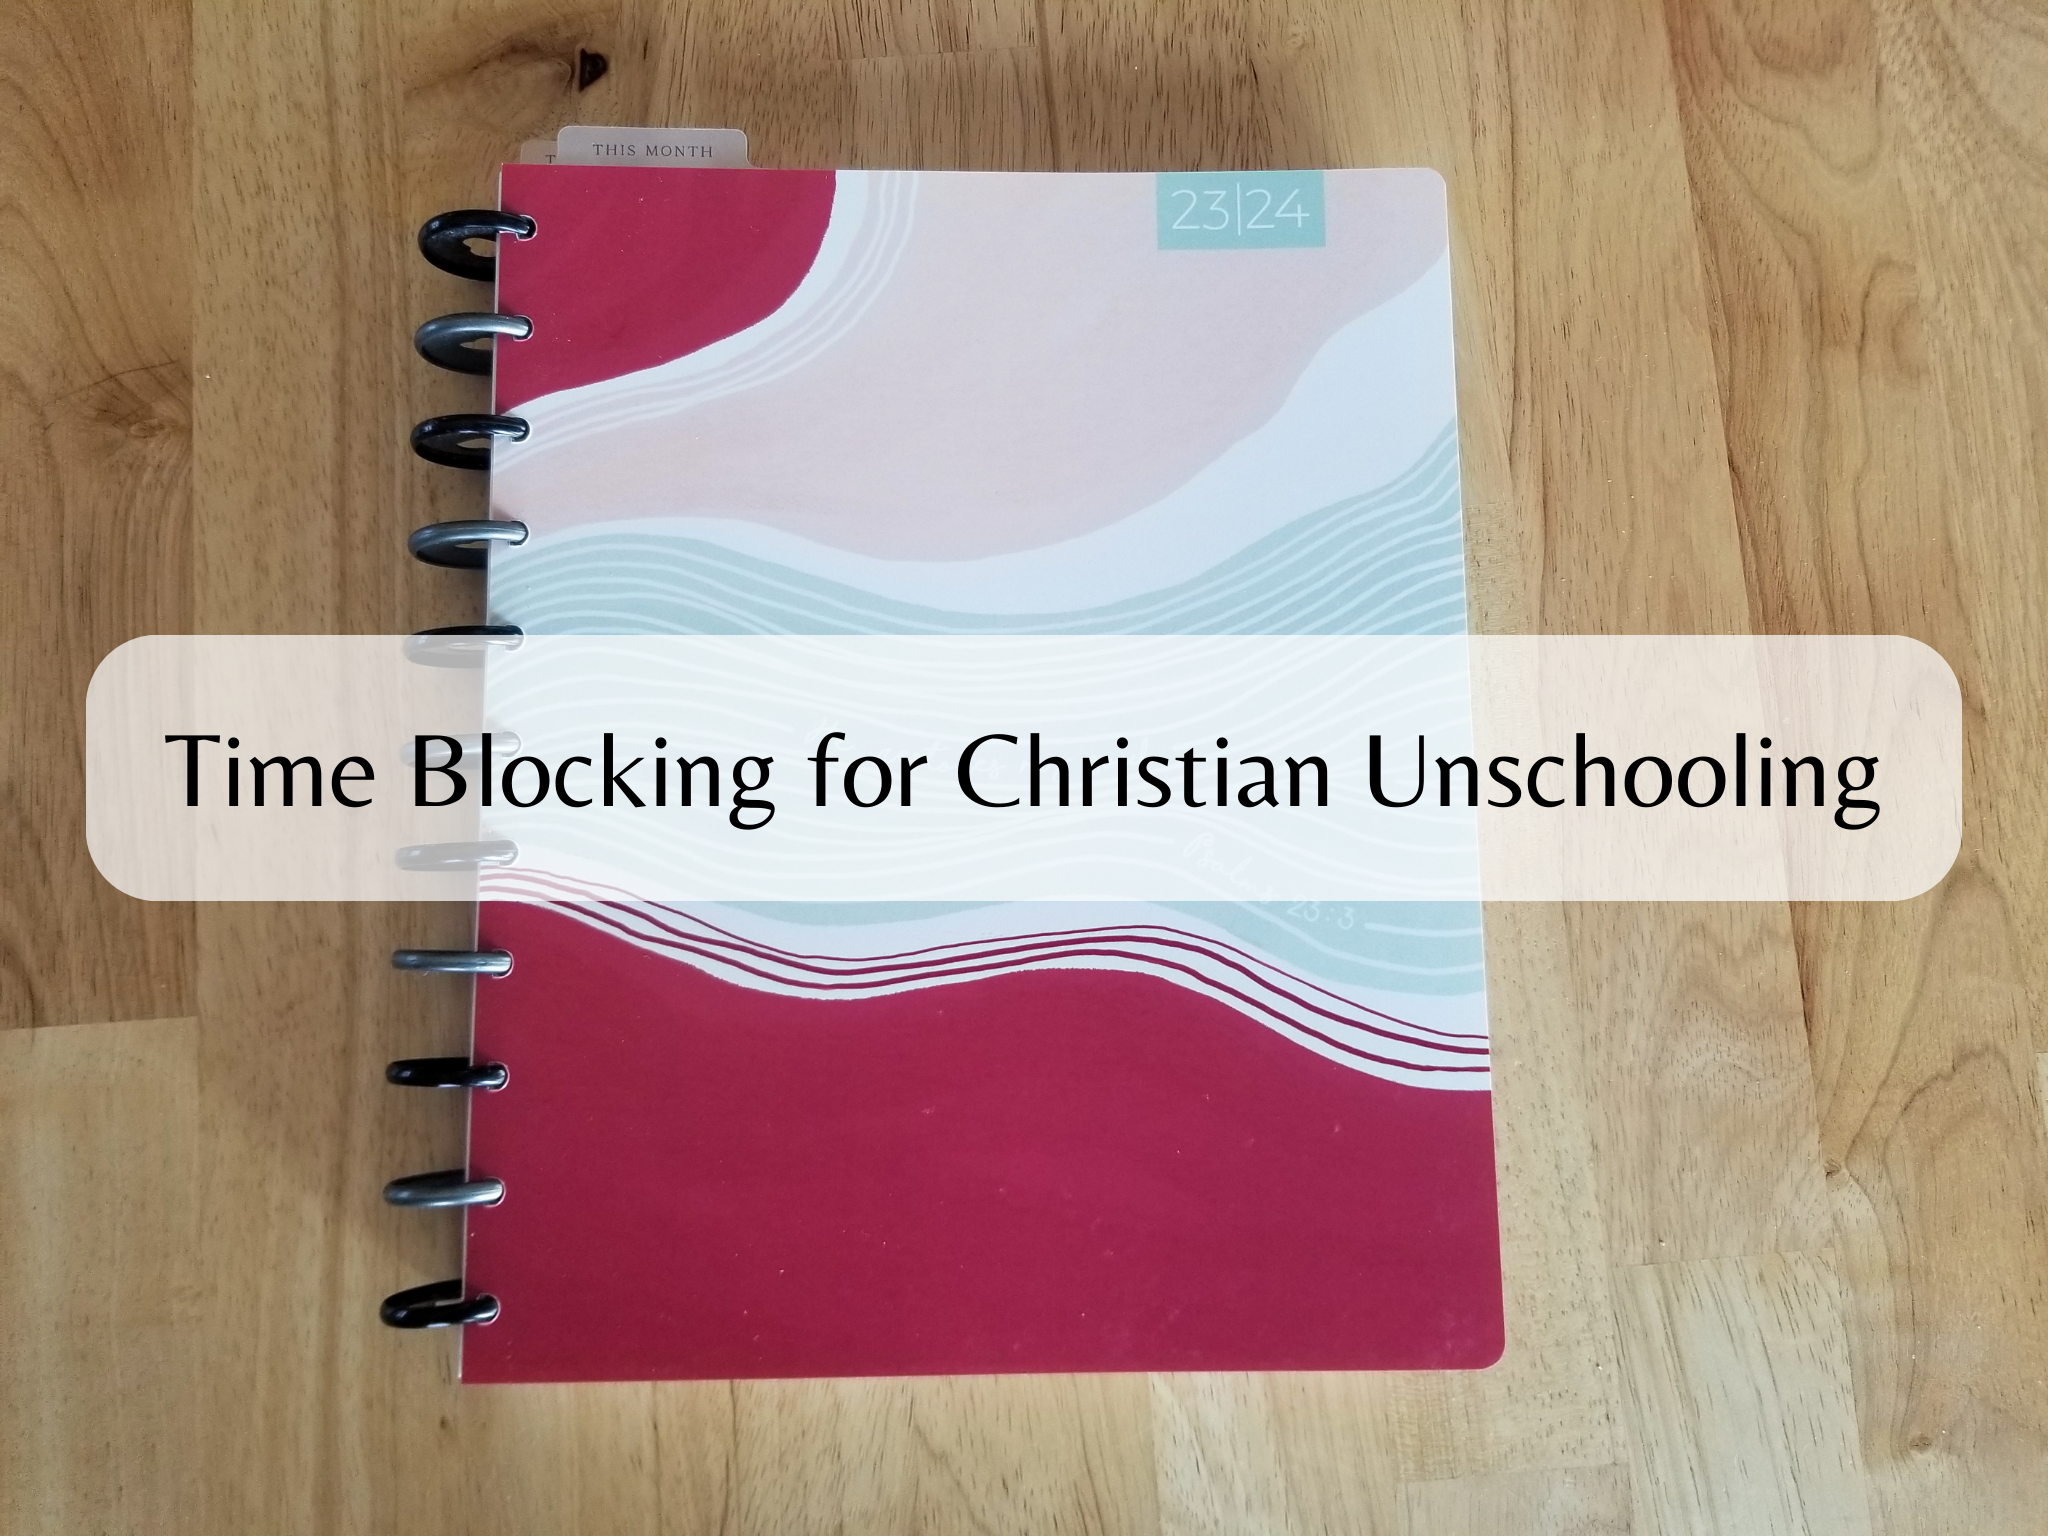 Time Blocking for Christian Unschooling